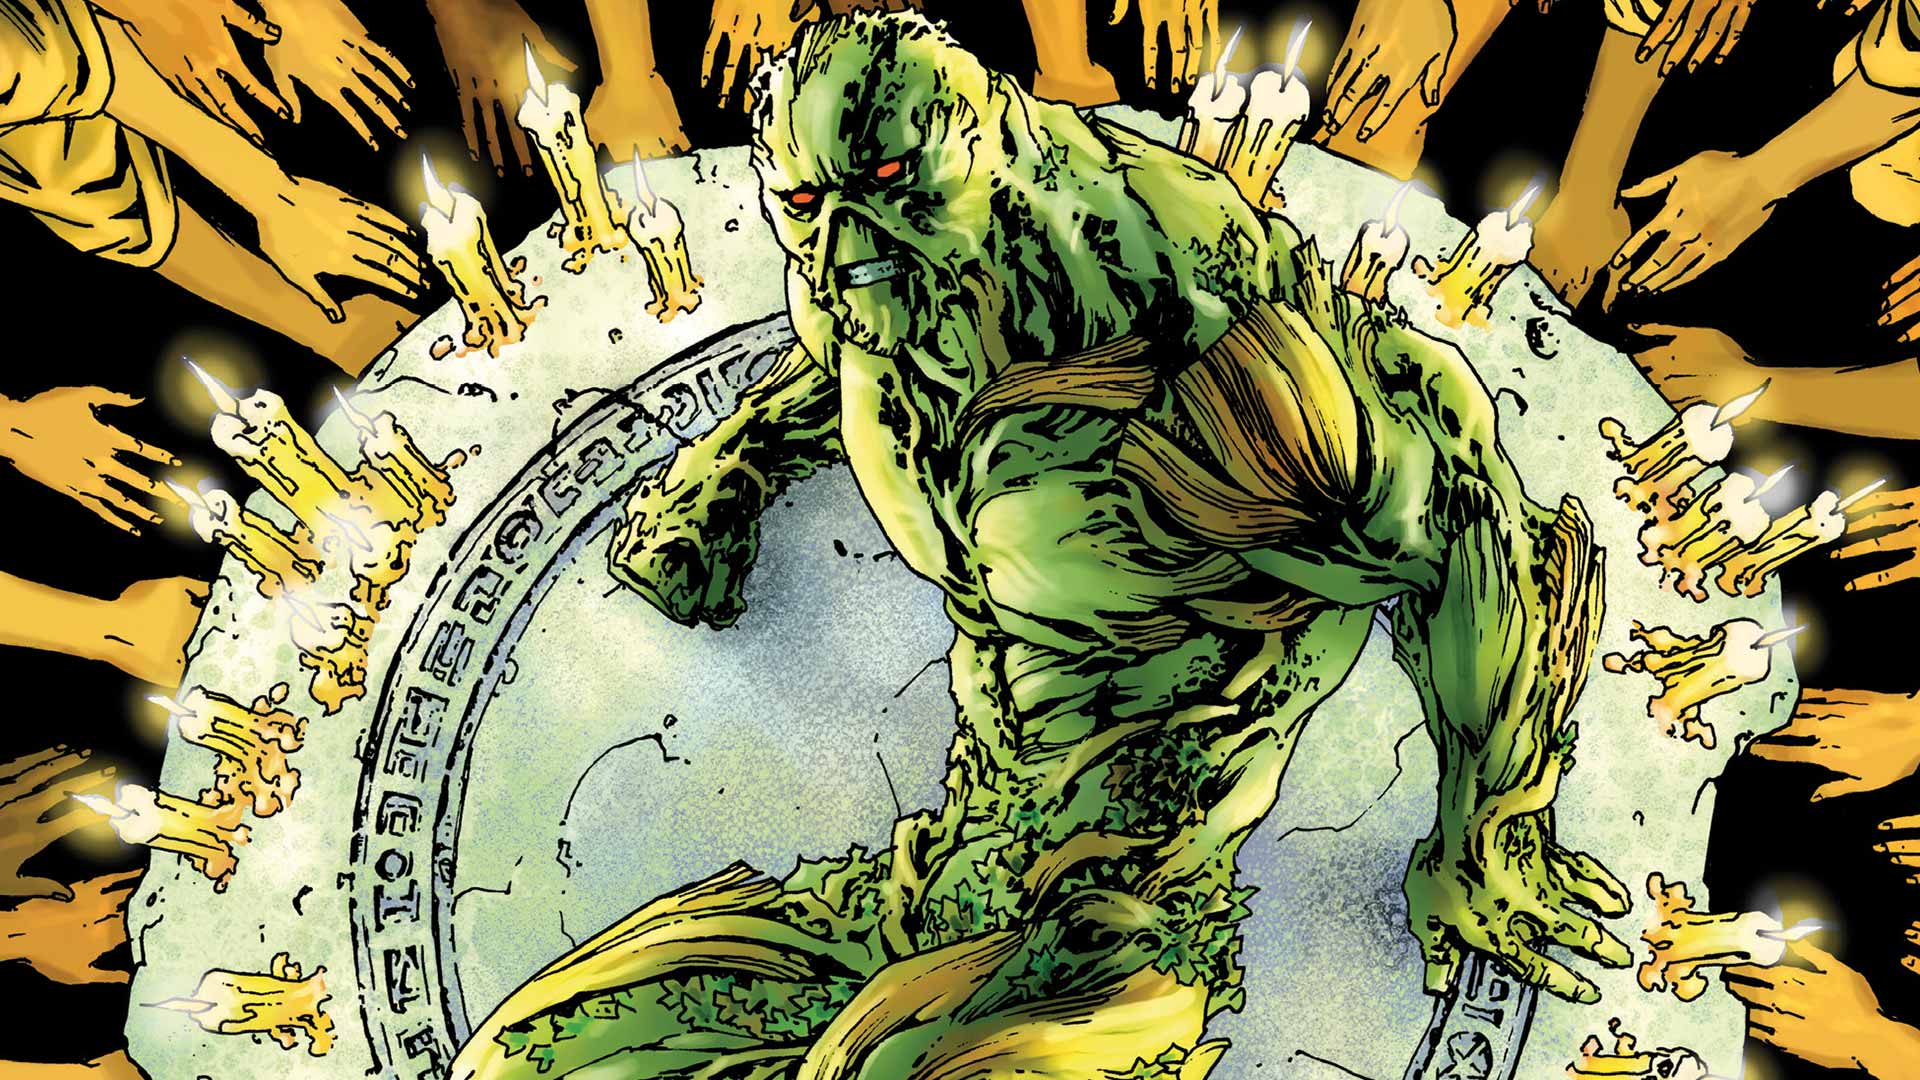 SWAMP THING VOL. 6: THE SUREEN